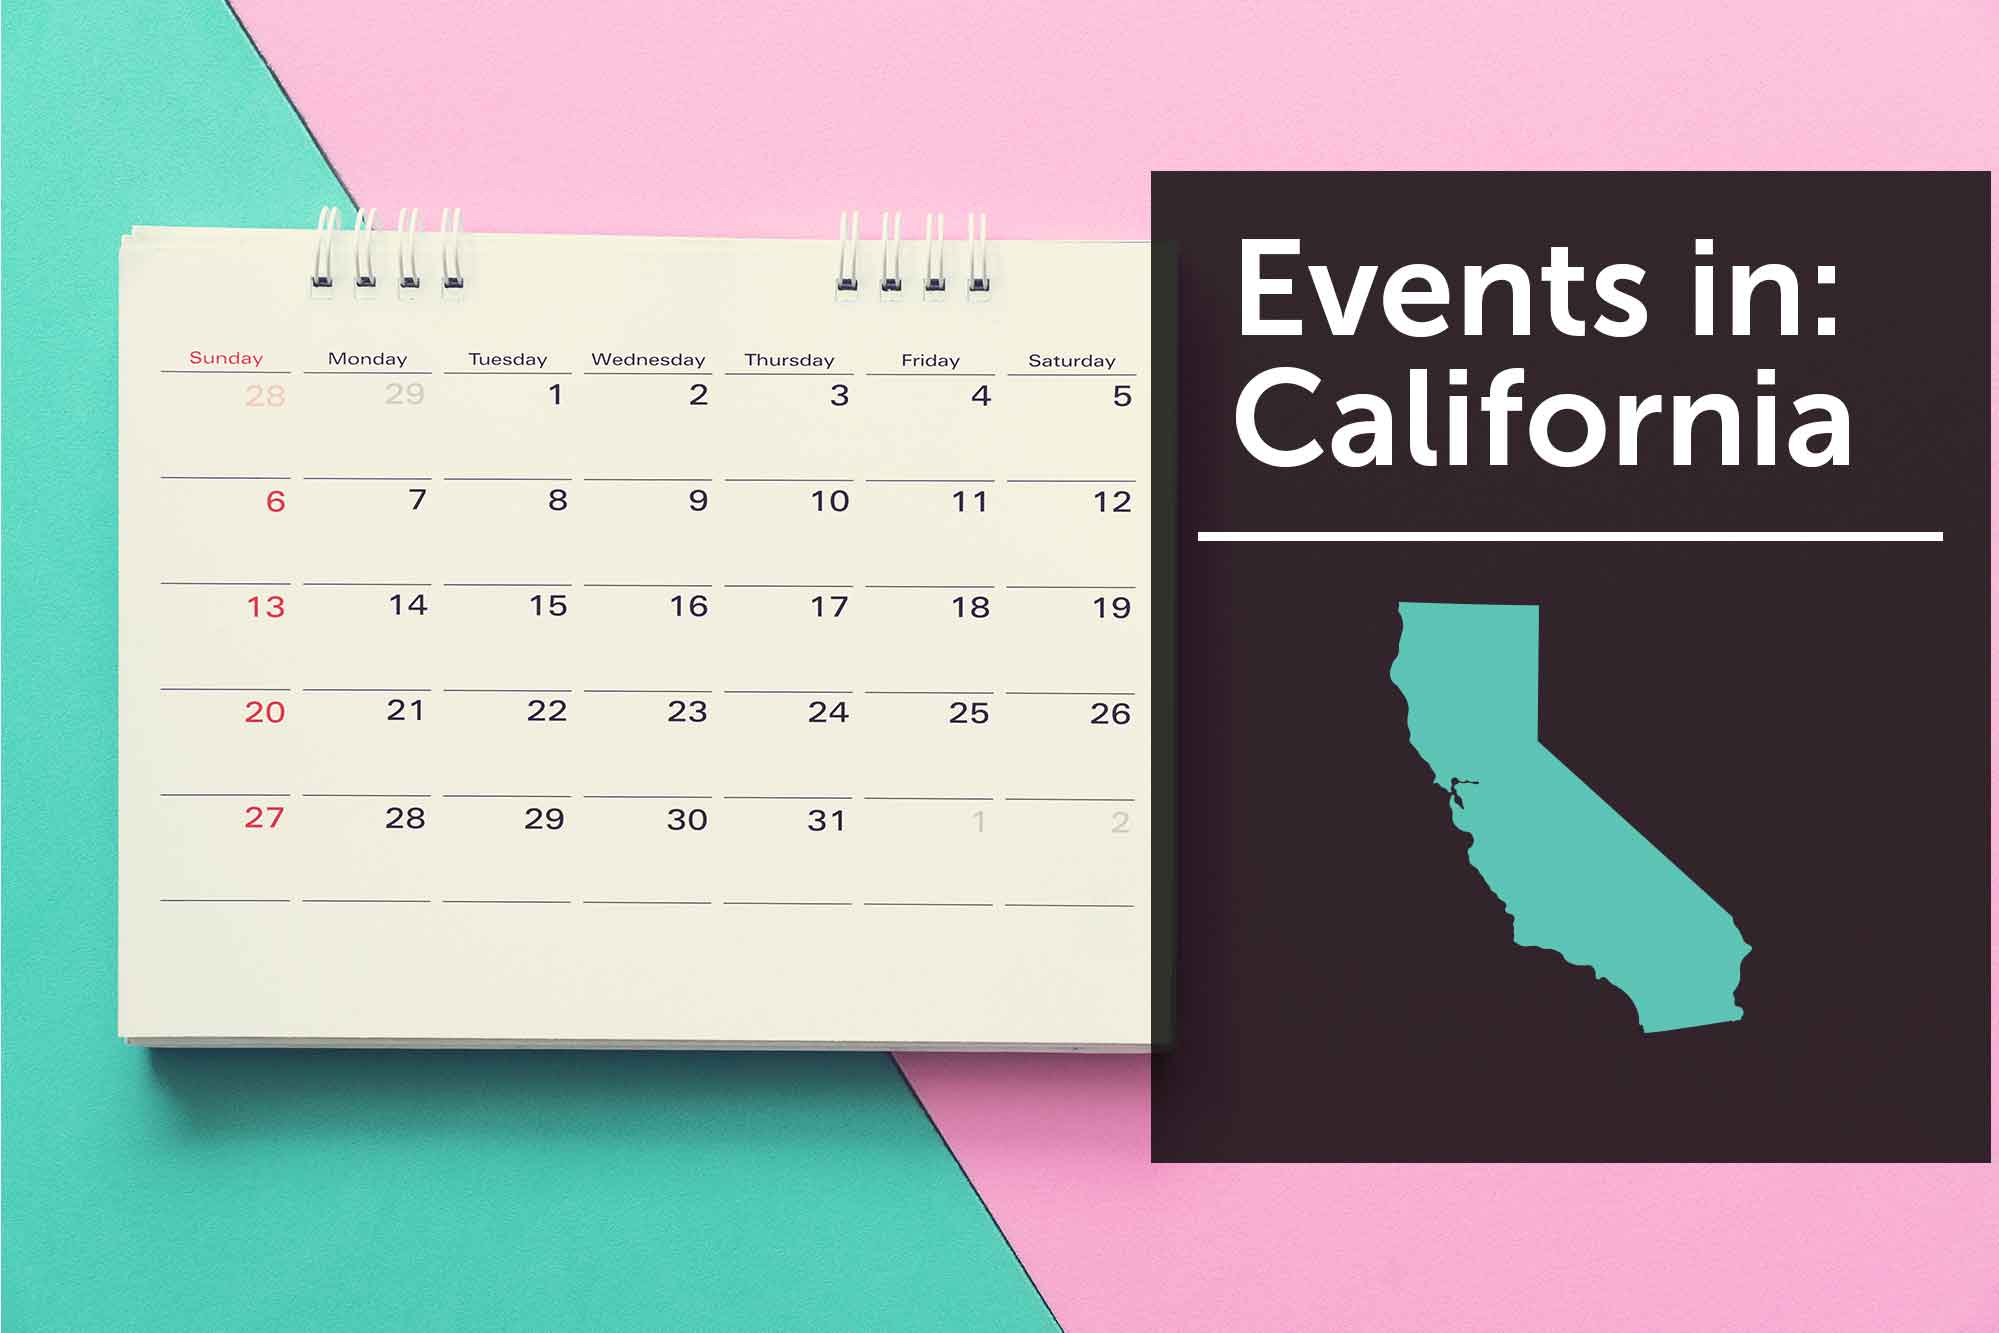 Women's business events in California